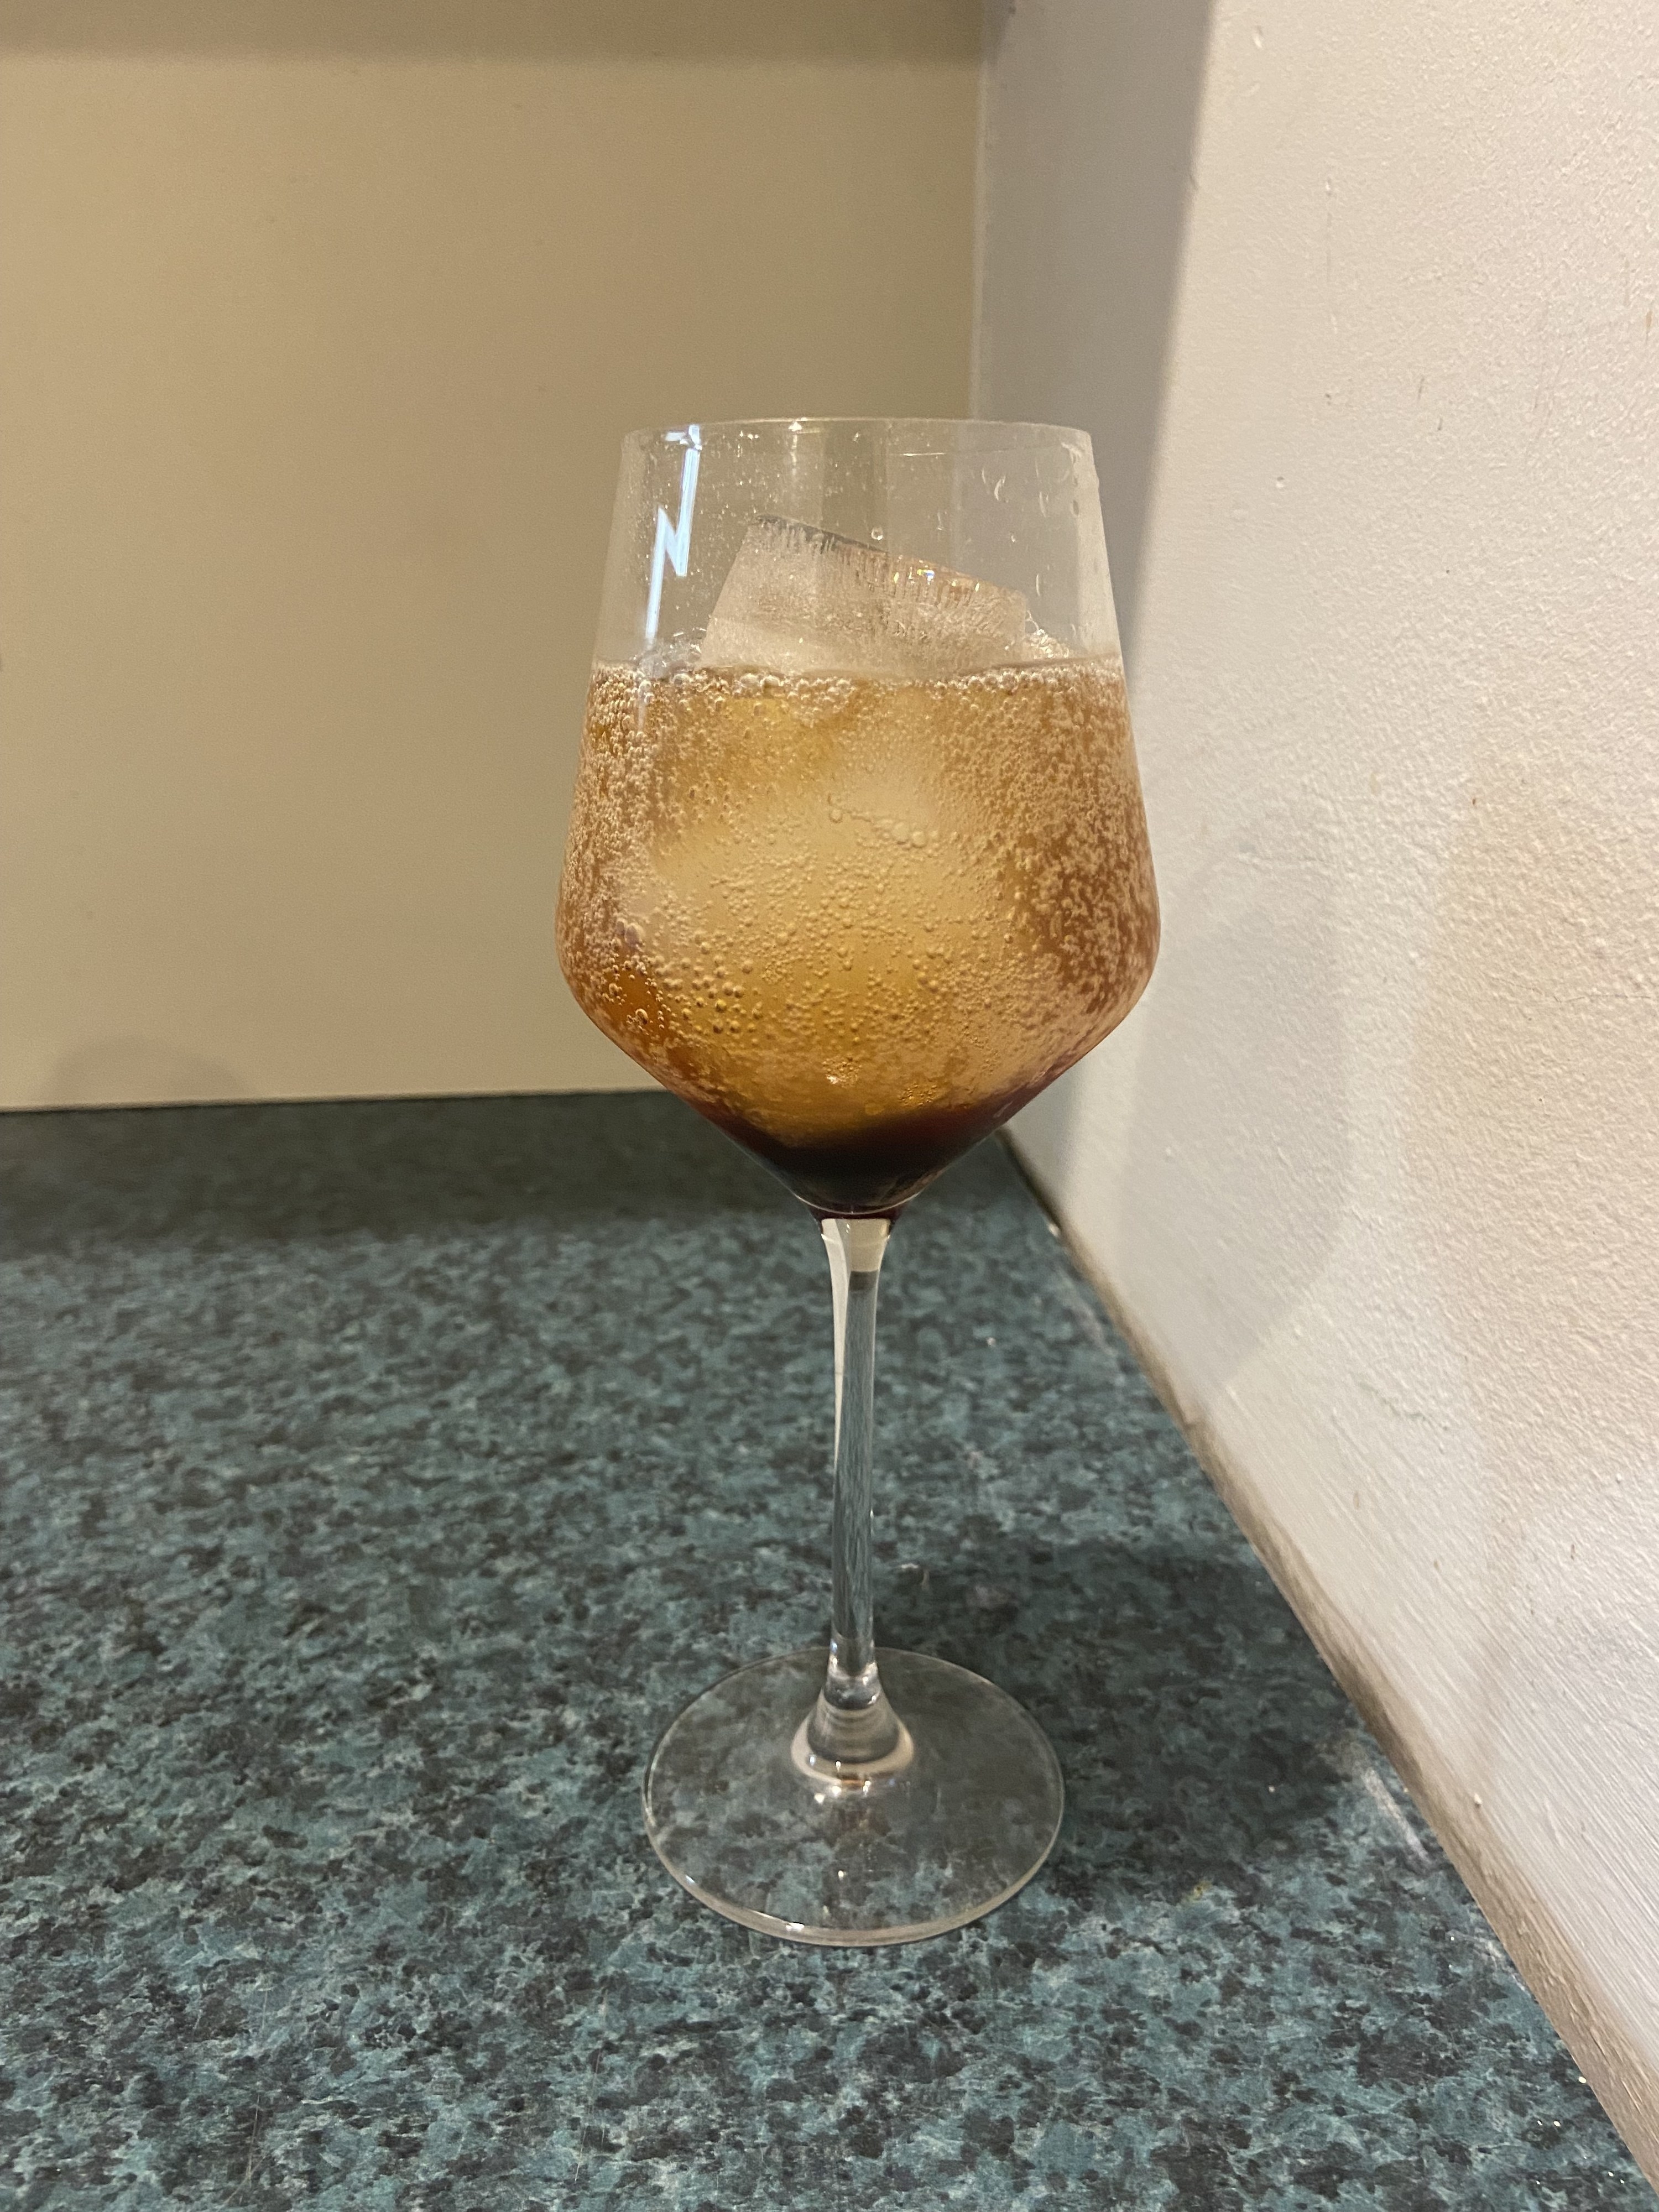 The glass with ice, vinegar, and La Croix